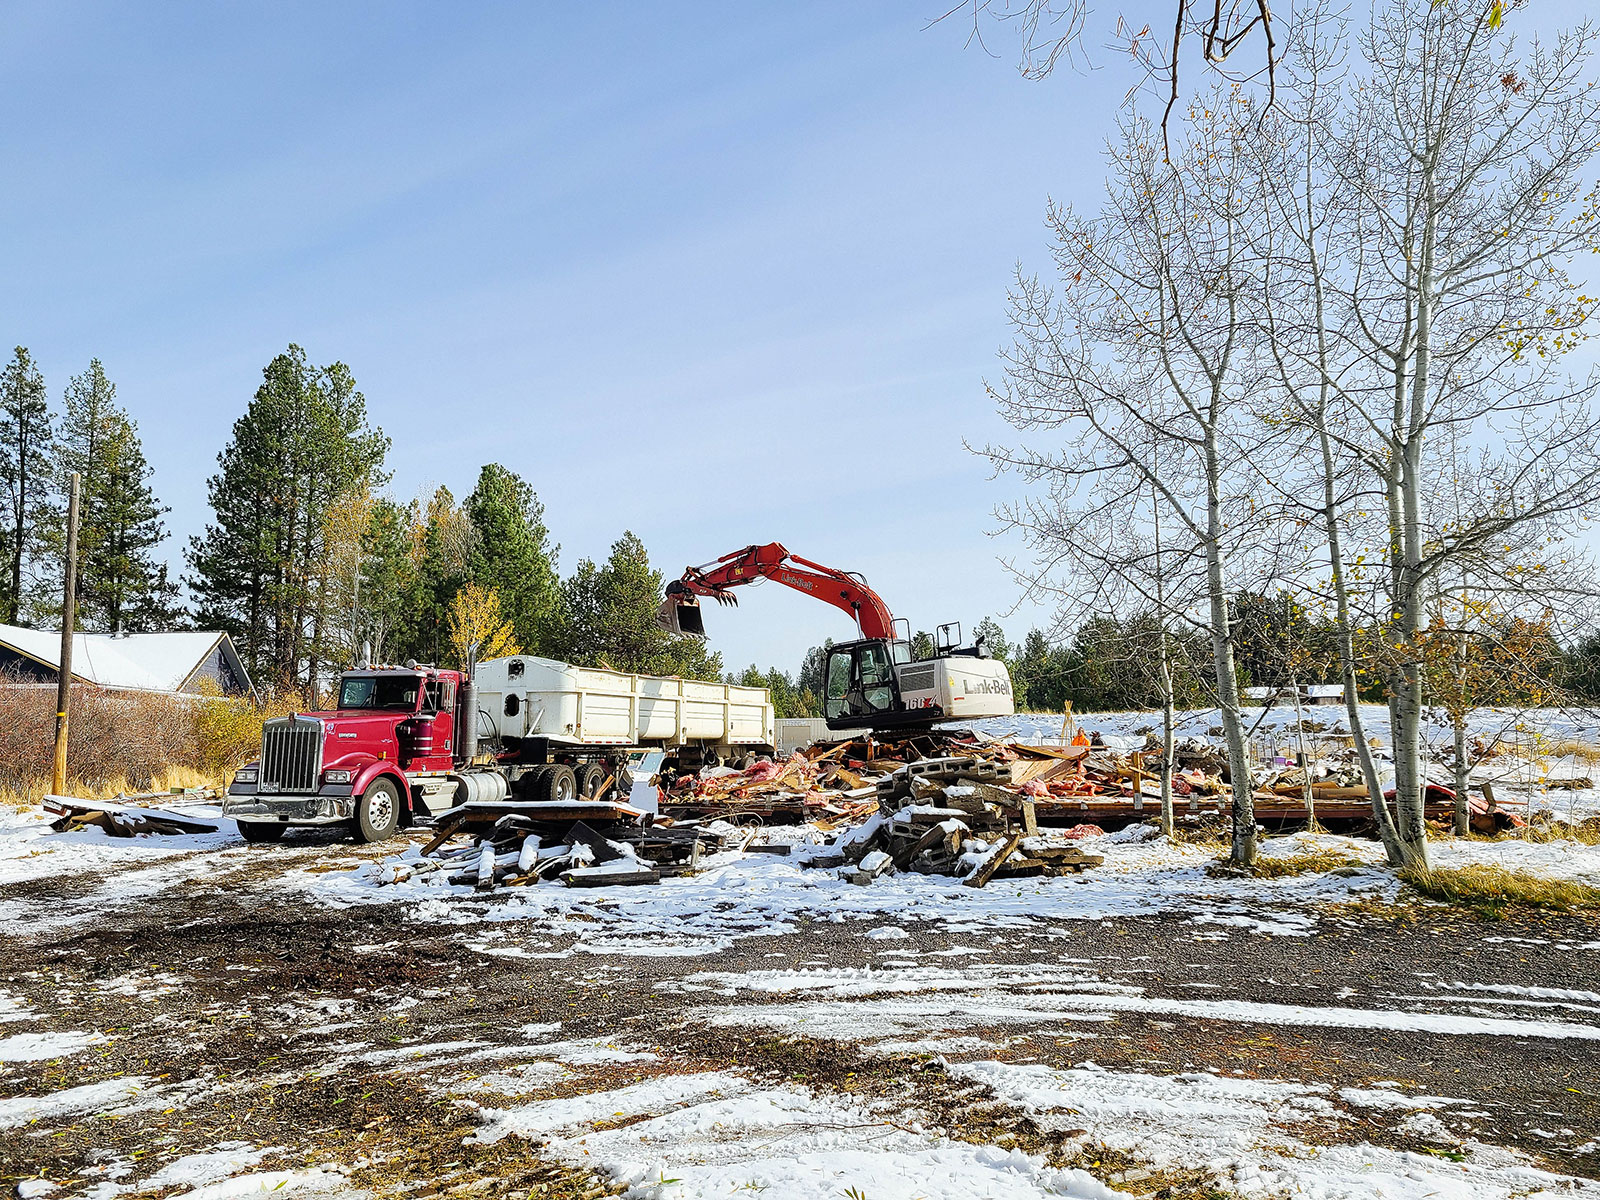 Excavator moving piles of debris into a large dump truck at a residential demo site